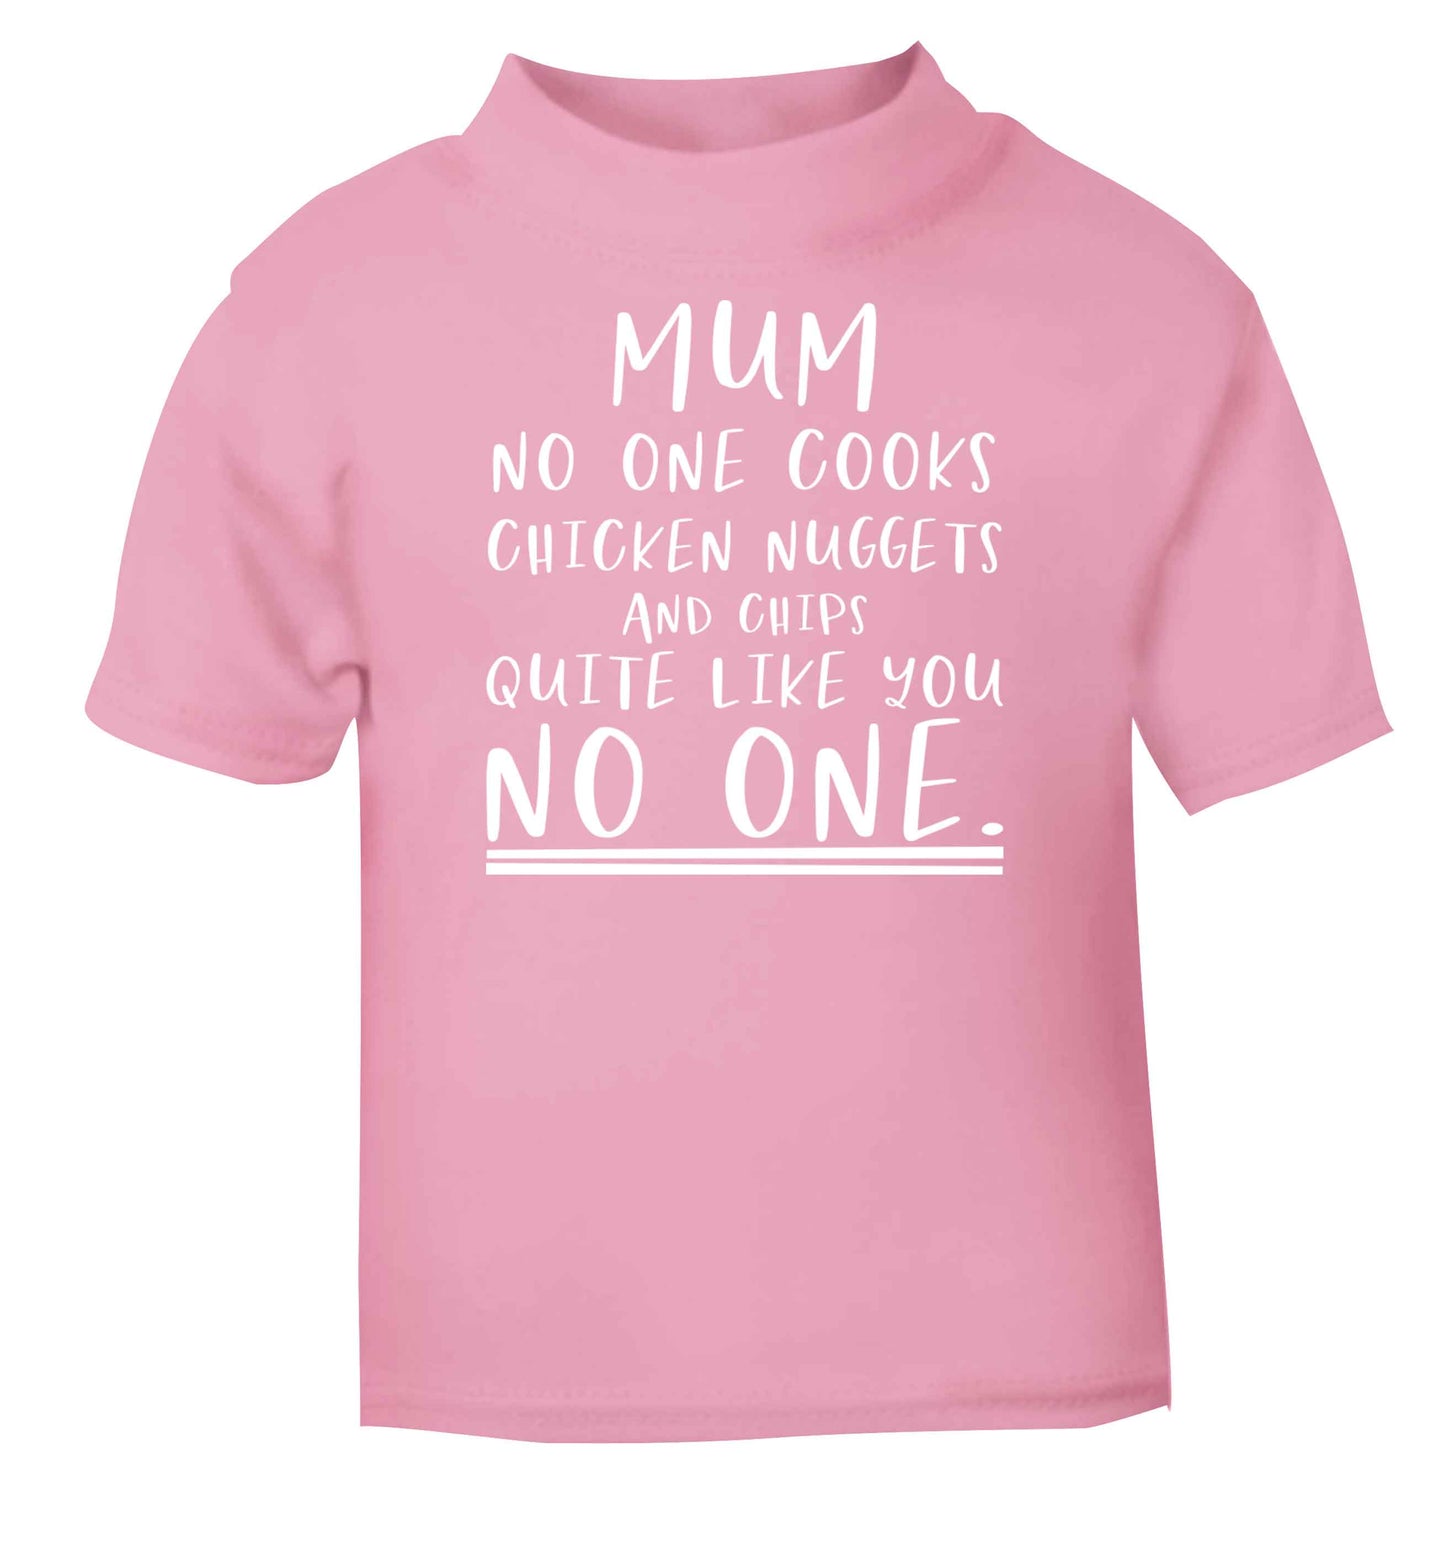 Super funny sassy gift for mother's day or birthday!  Mum no one cooks chicken nuggets and chips like you no one light pink baby toddler Tshirt 2 Years